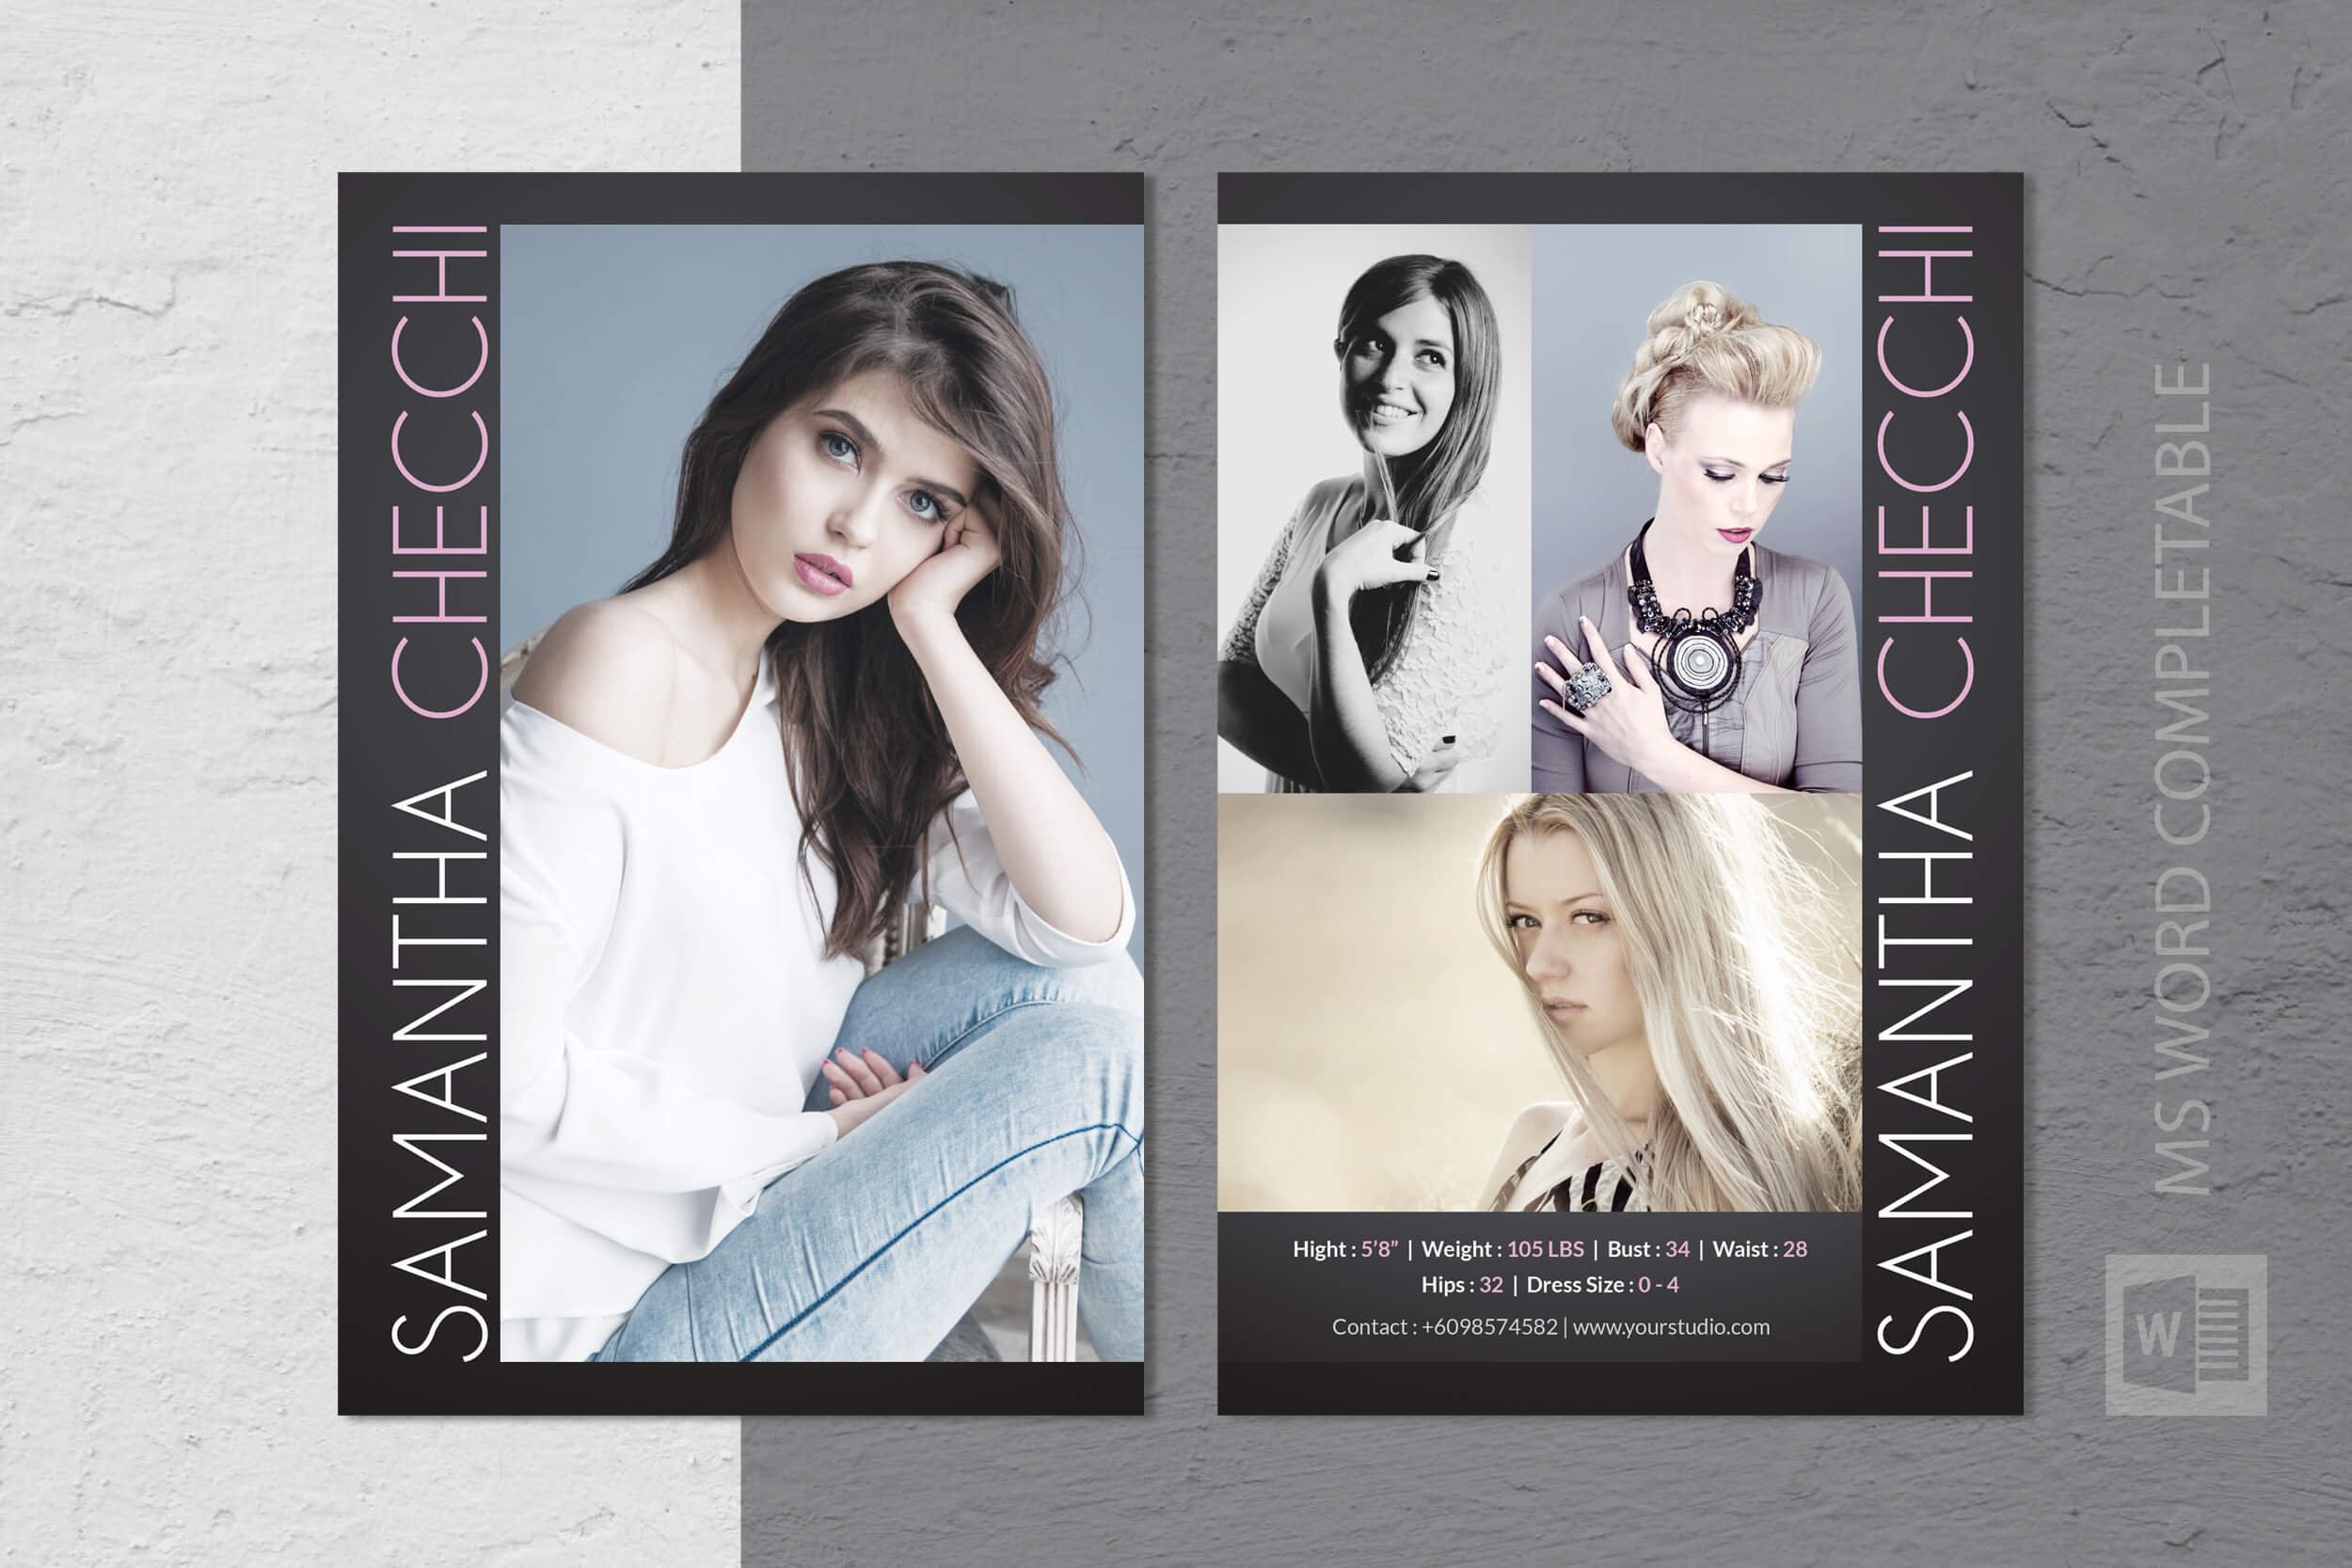 015 Model Comp Card Template Ideas Outstanding Psd Free Intended For Free Model Comp Card Template Psd